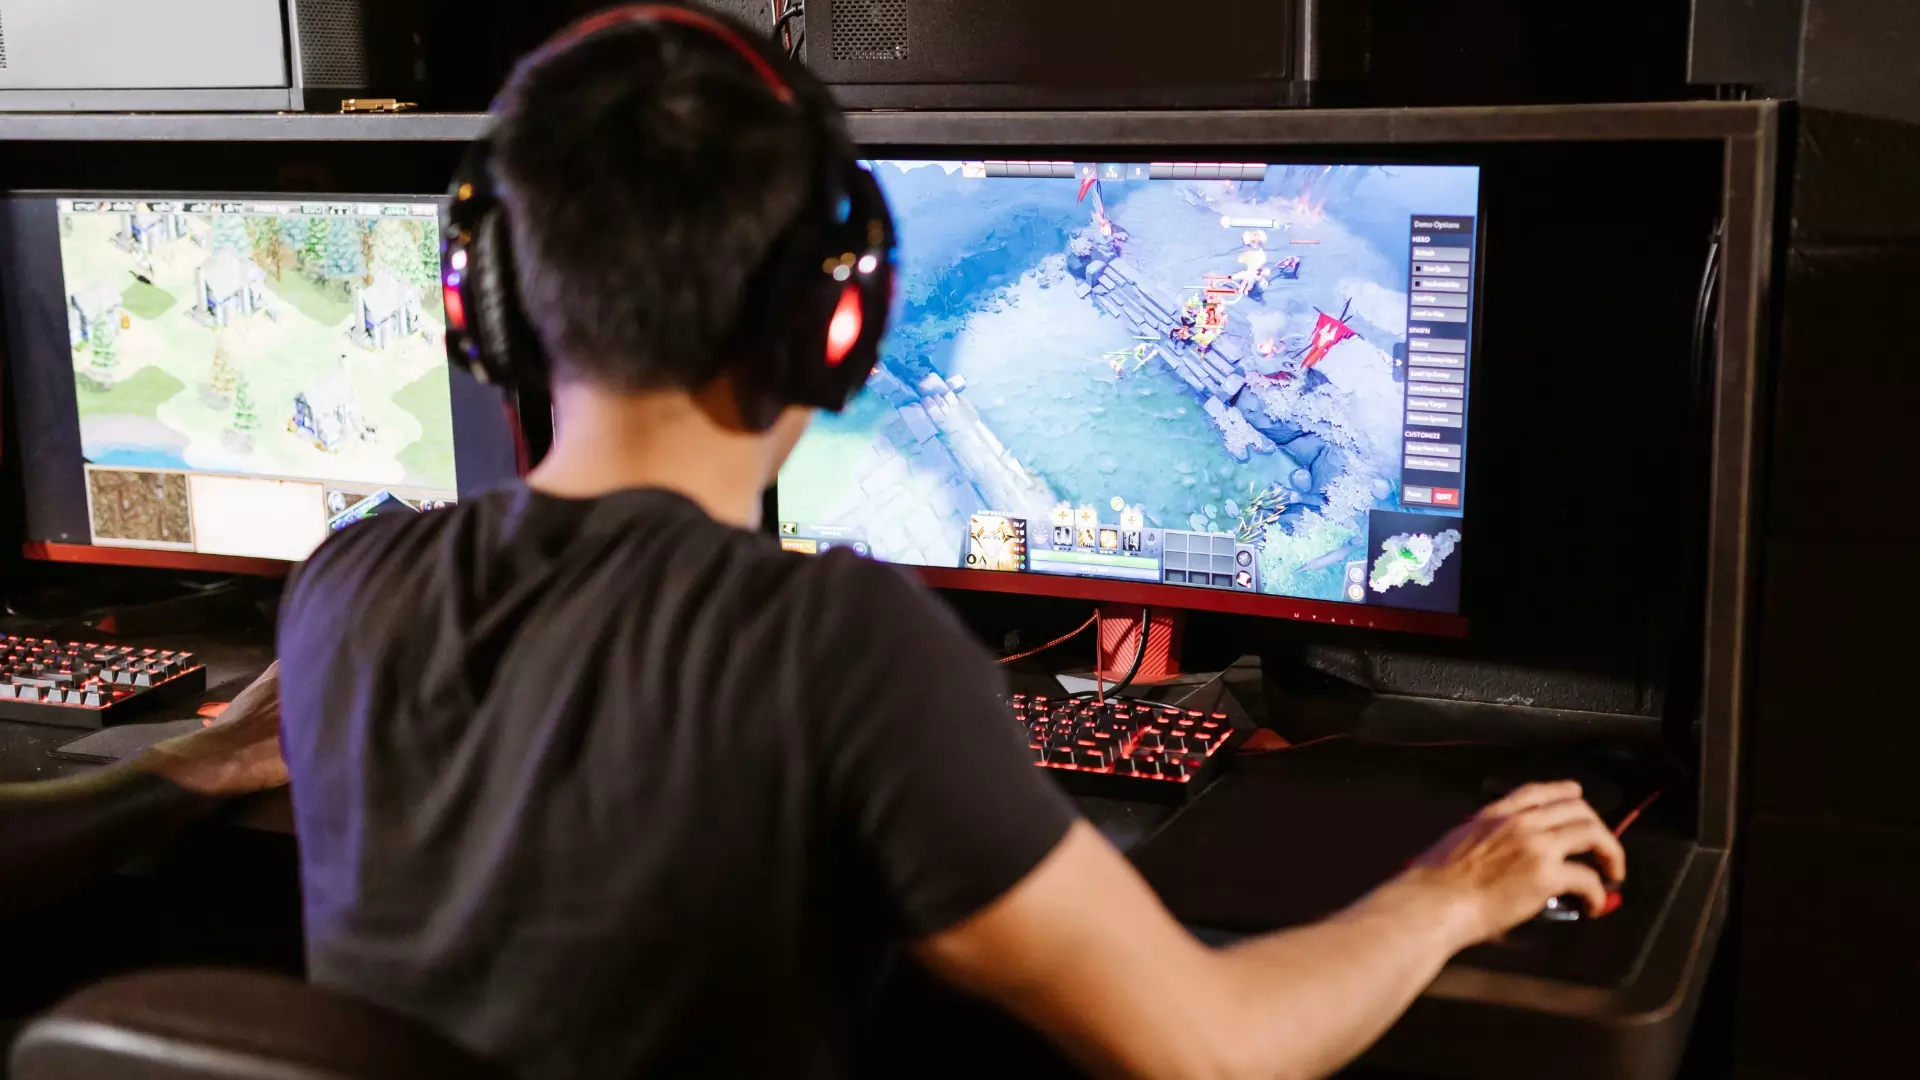 Higher Frame Rates Give You a Smoother Gaming Experience